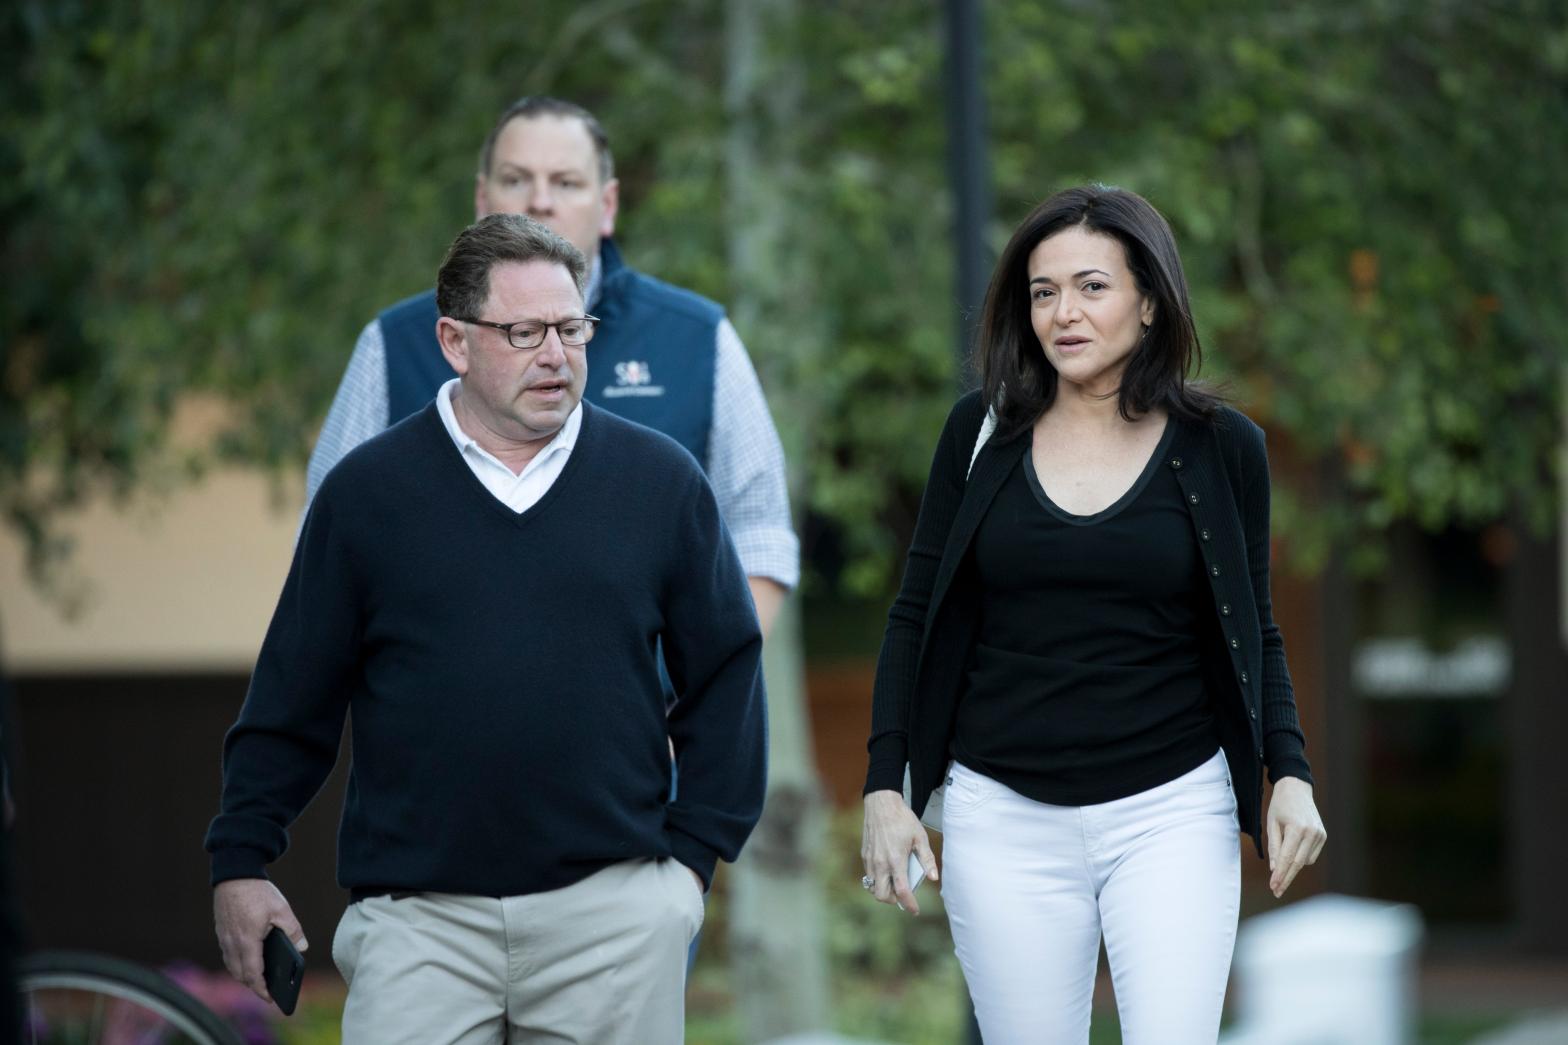 Bobby Kotick, chief executive officer of Activision Blizzard, and Sheryl Sandberg, chief operating officer of Facebook, together for a conference in 2018, before the couple split. (Photo: Drew Angerer, Getty Images)